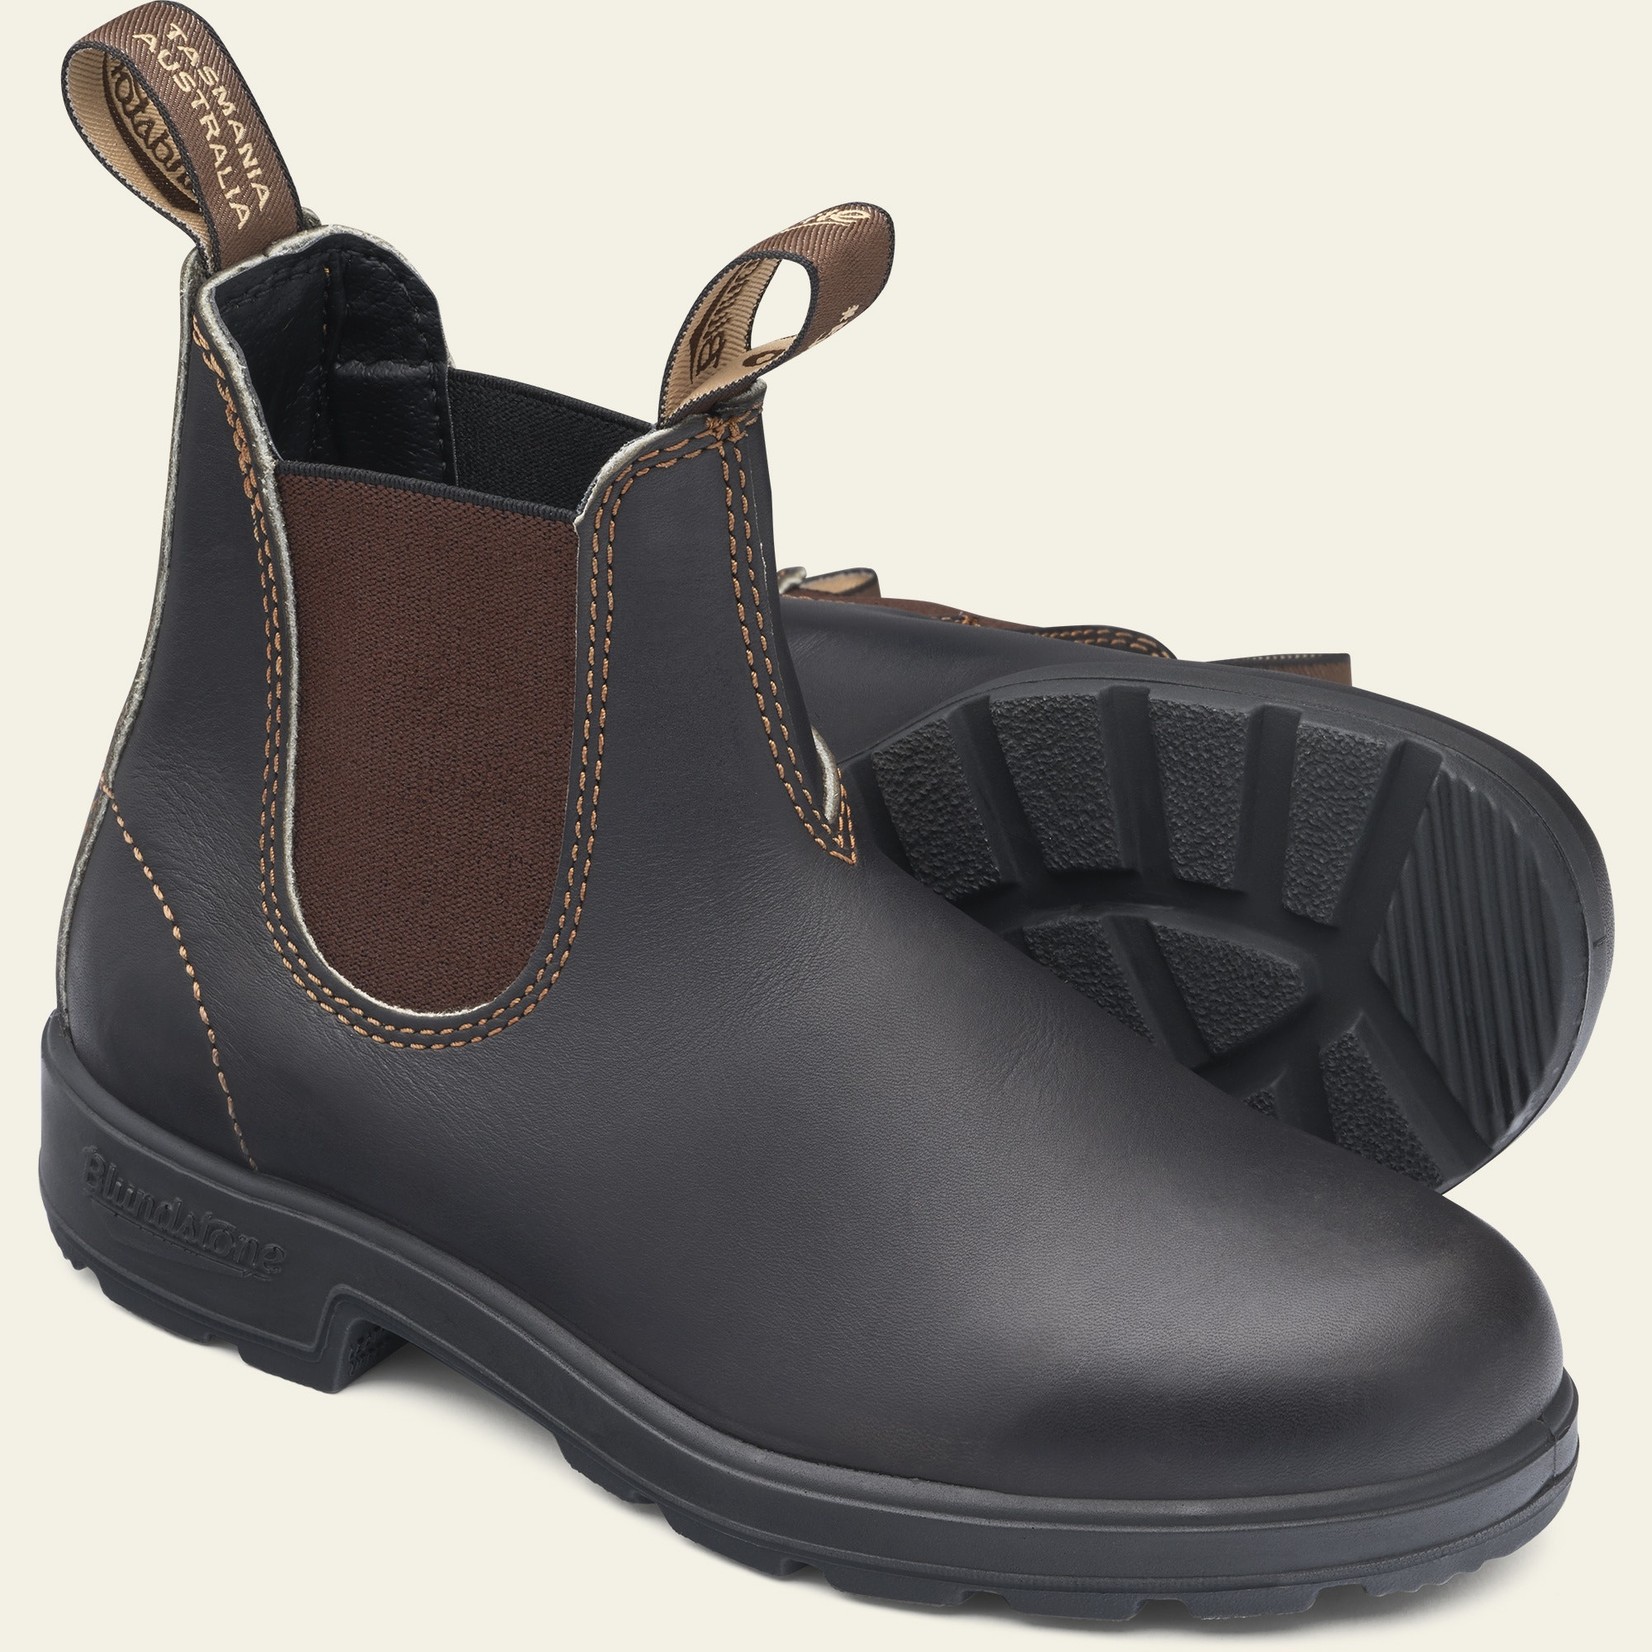 Blundstone 500 Chelsea Stout Brown